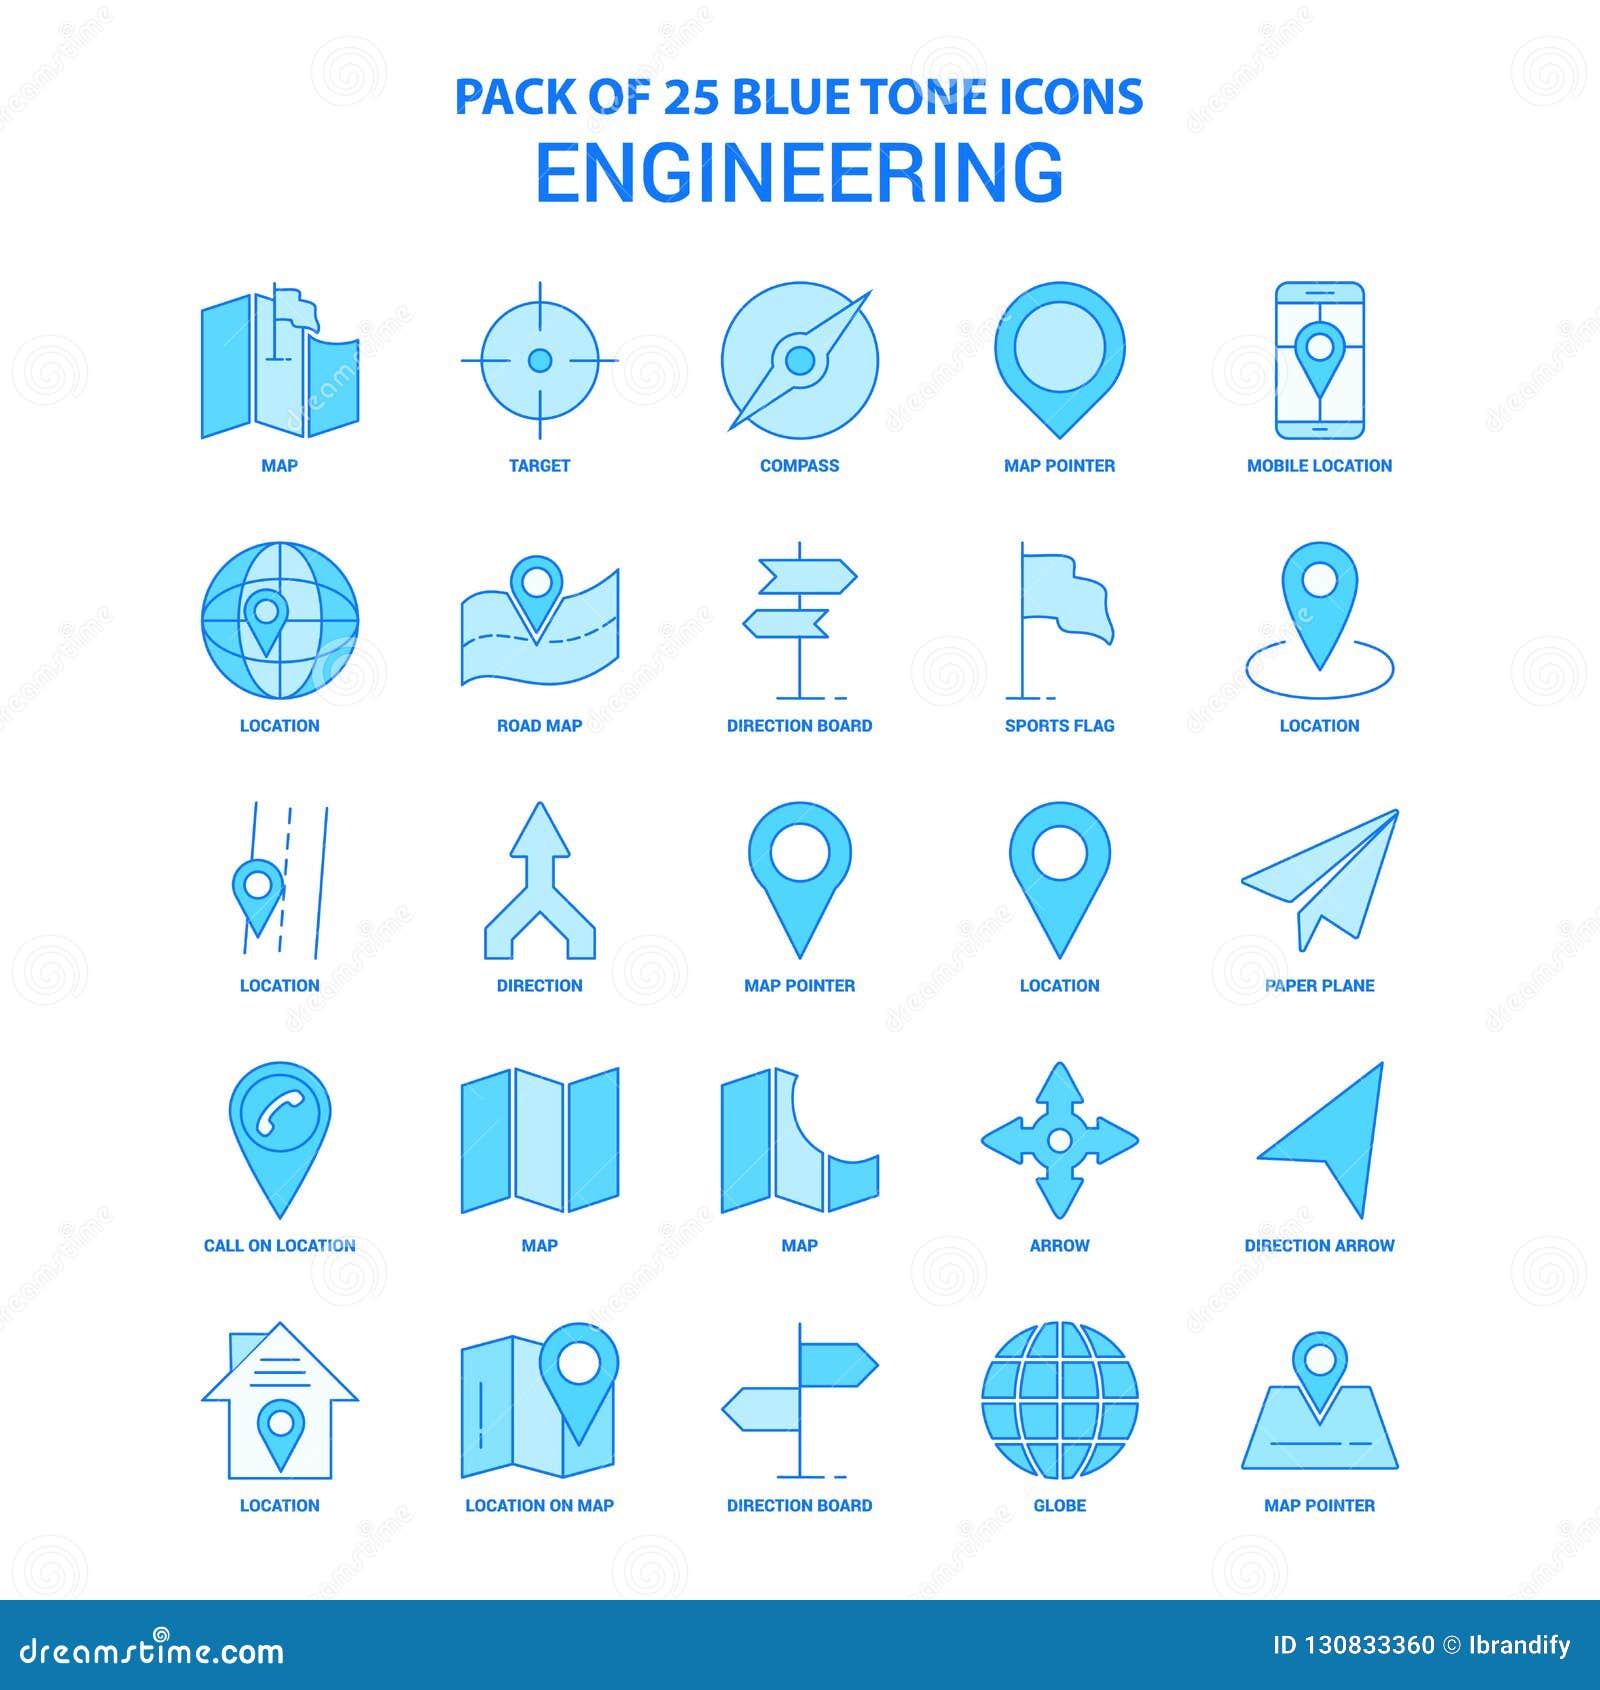 engineering blue tone icon pack - 25 icon sets